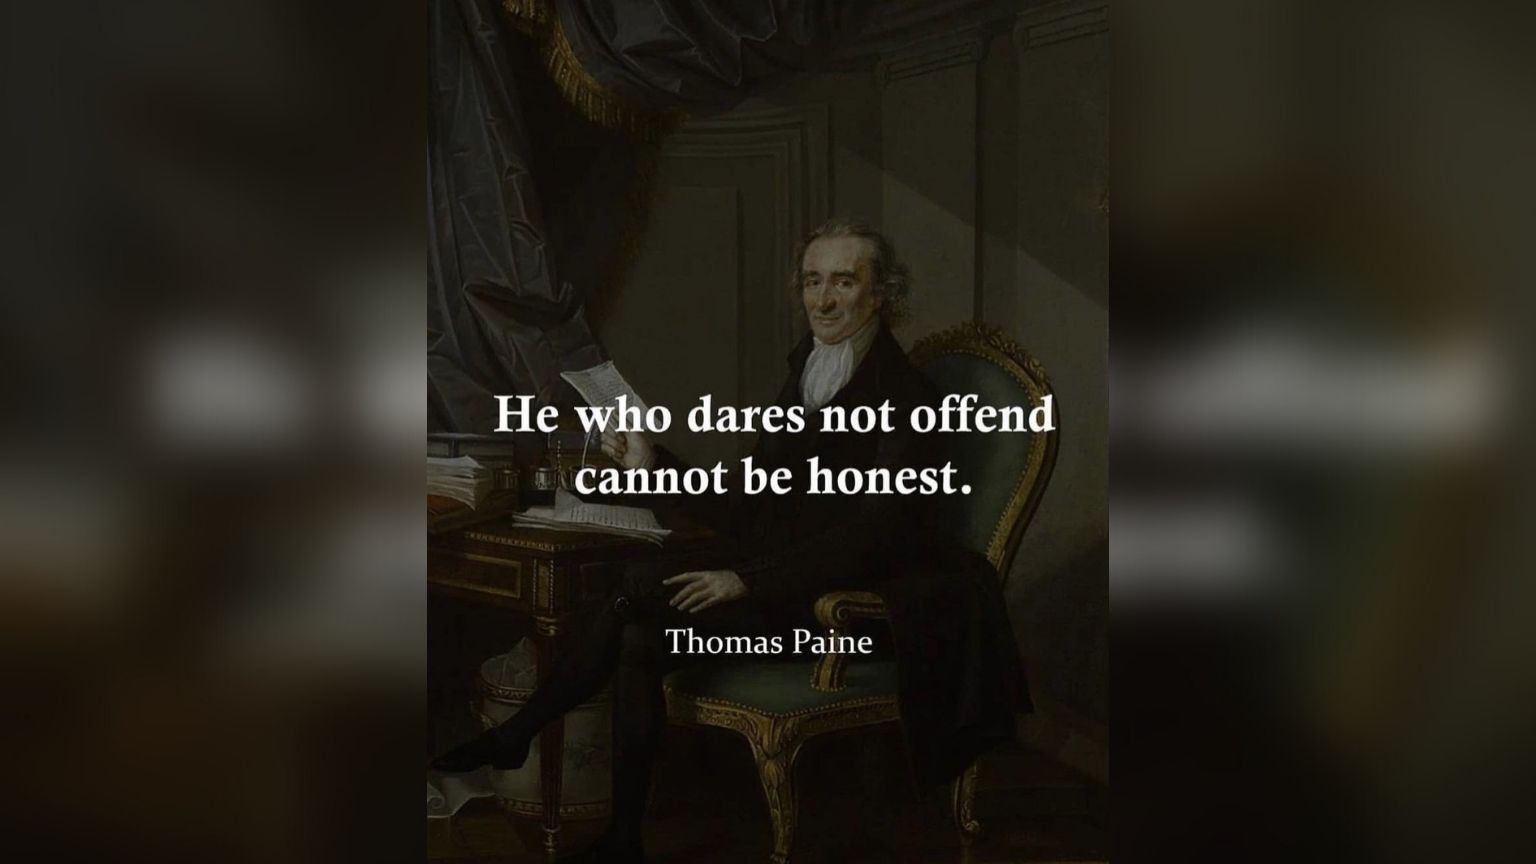 Instagram and Facebook block quote from Thomas Paine for “false information”